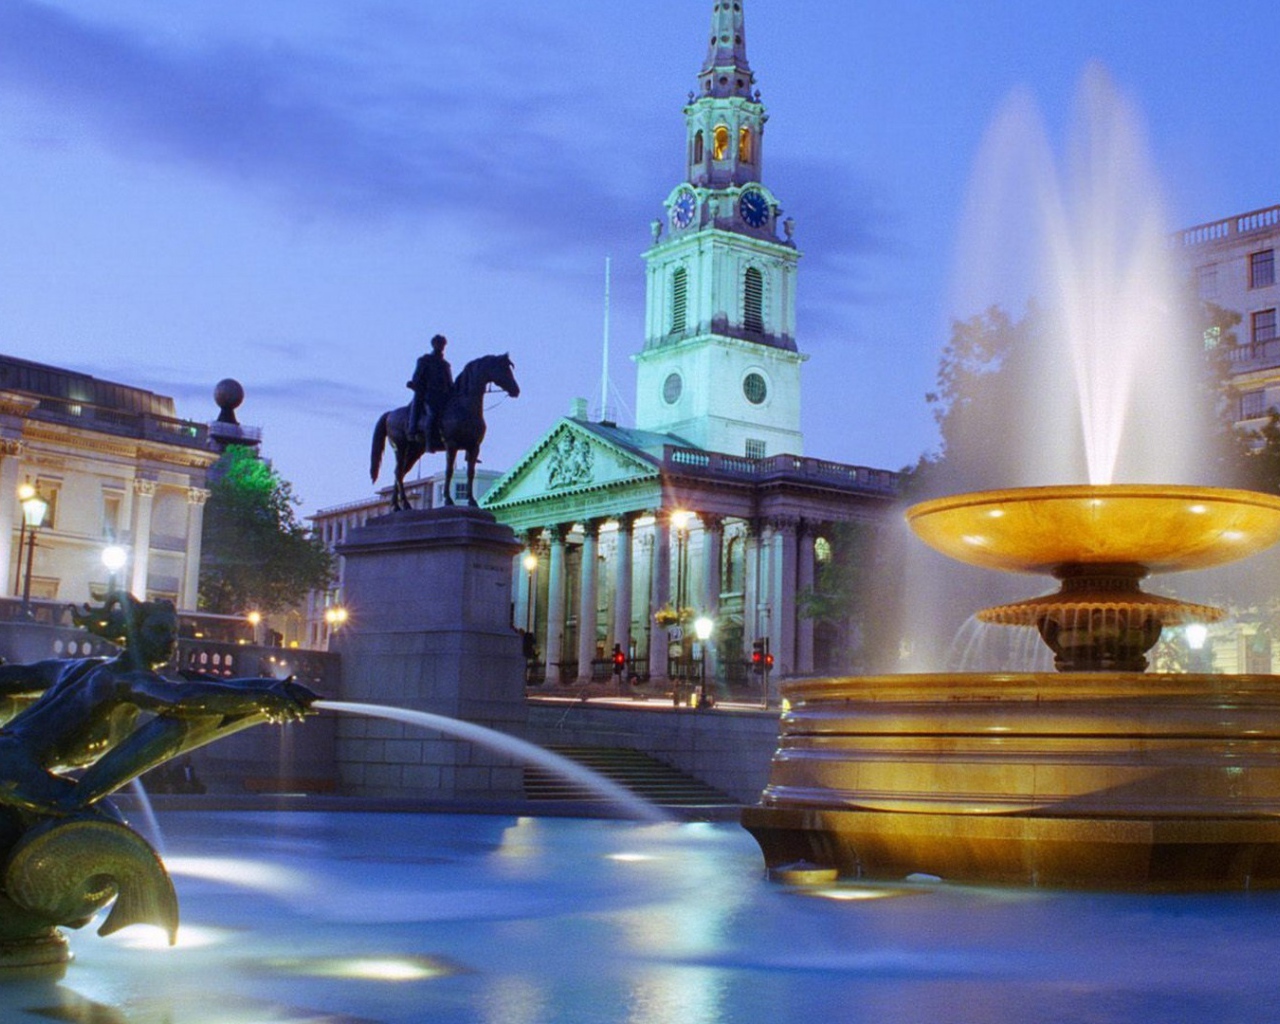 Fountains in London